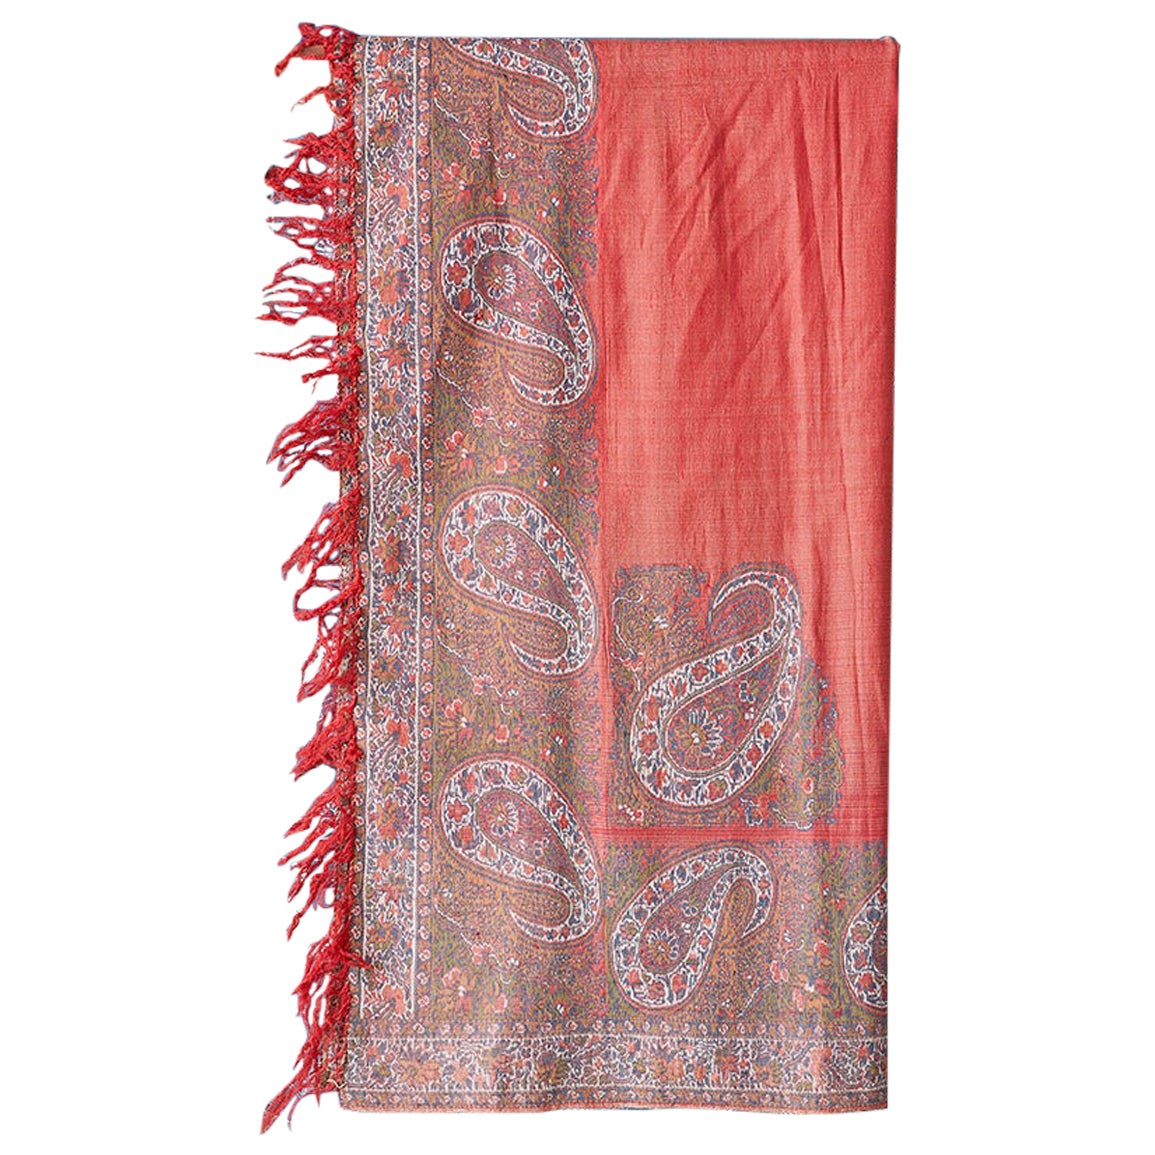 Antique Woven Paisley Shawl Blanket in Wool and Silk, USA, 19th Century